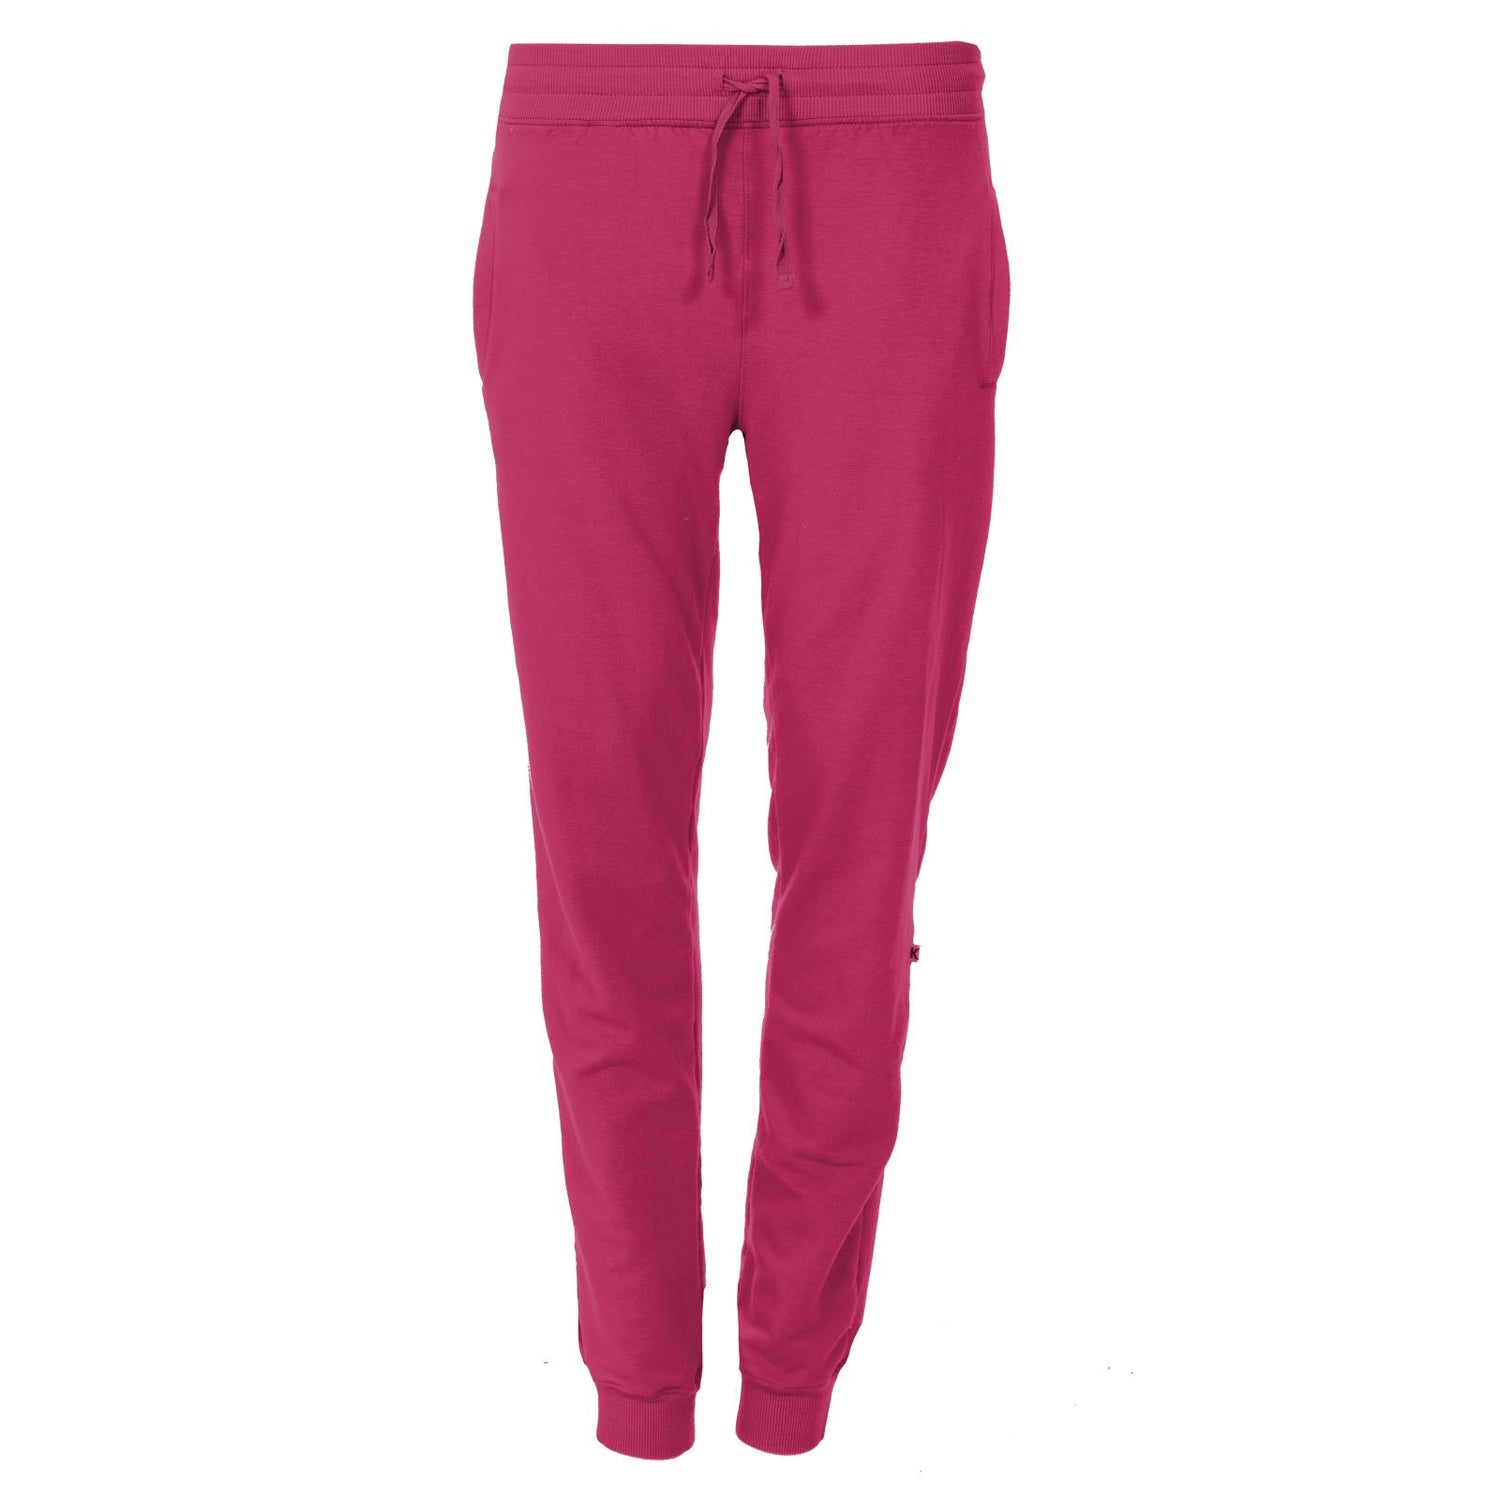 Women's Luxe Athletic Joggers in Prickly Pear